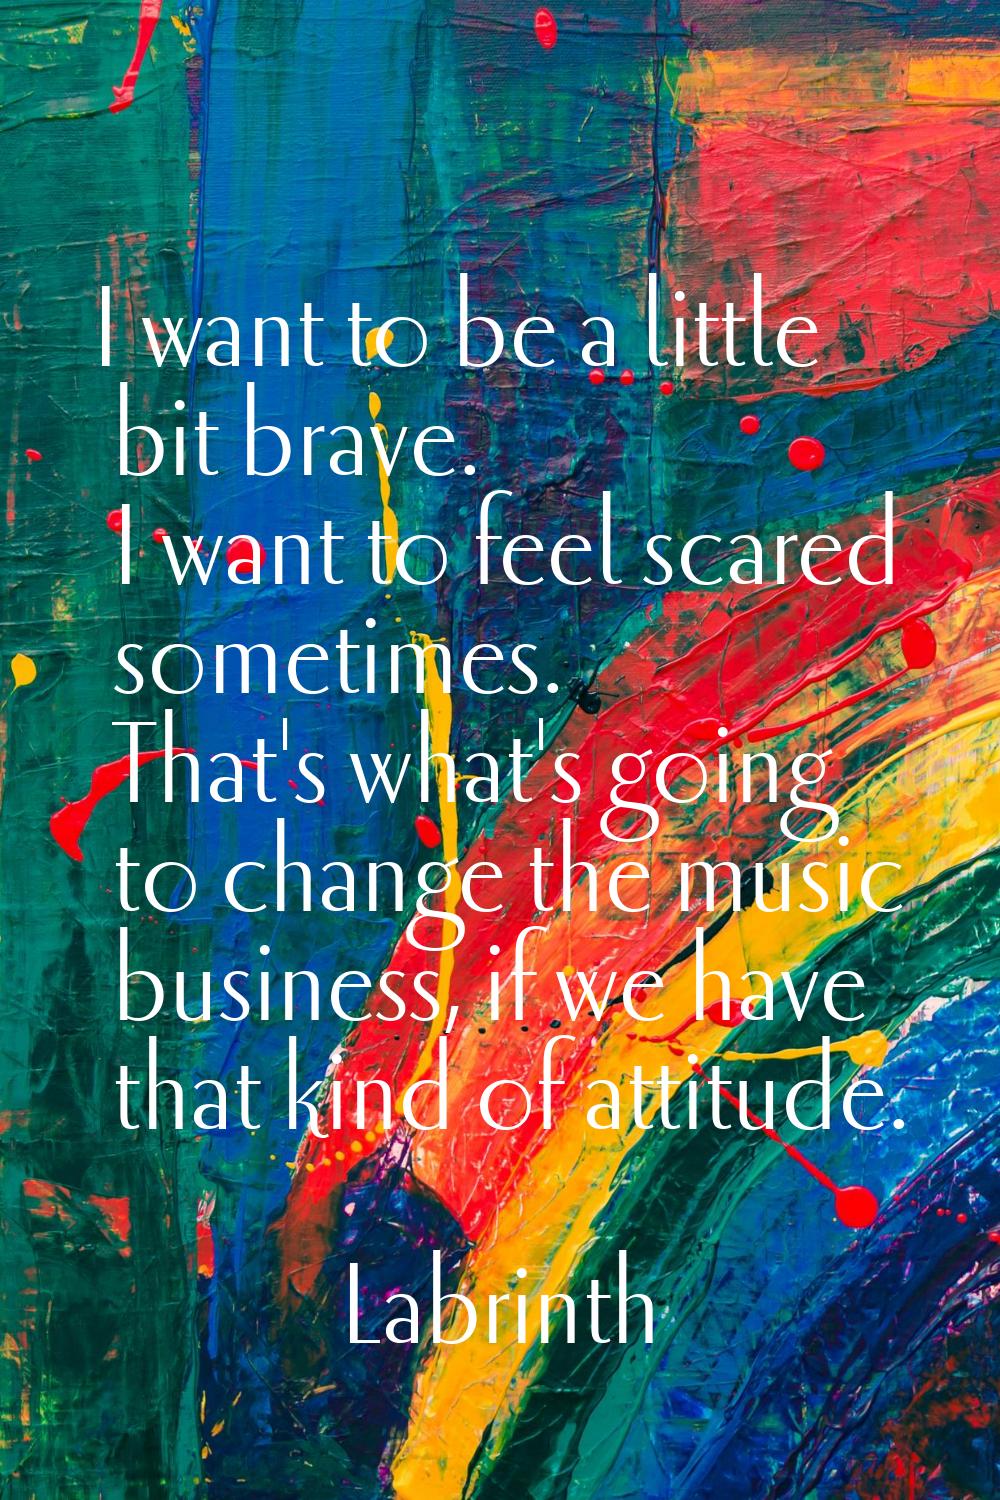 I want to be a little bit brave. I want to feel scared sometimes. That's what's going to change the